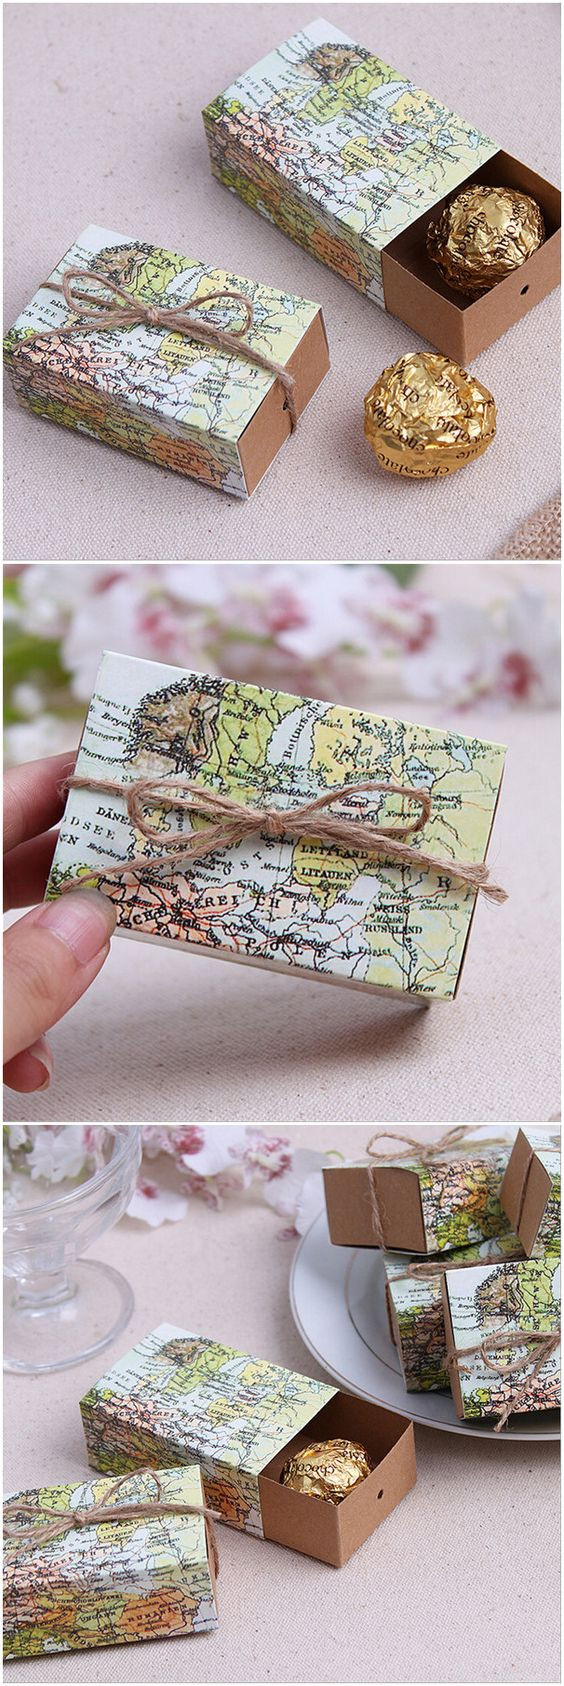 Travel Themed Wedding Favors
 20 Travel Map Themed DIY Projects 2018